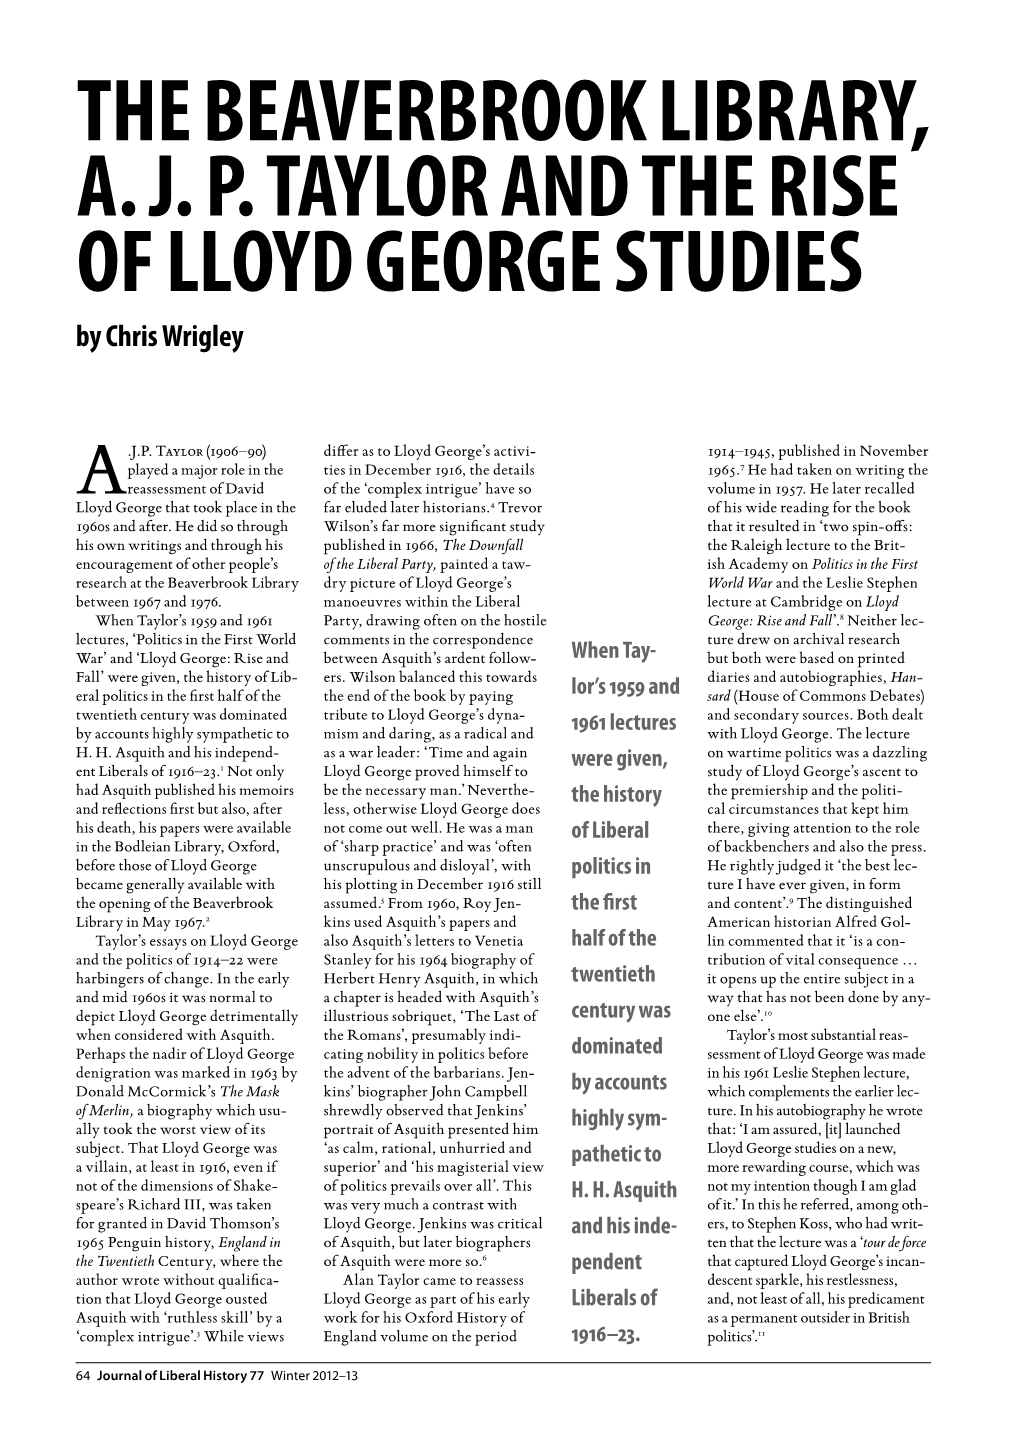 The Beaverbrook Library, A. J. P. Taylor and the Rise of Lloyd George Studies by Chris Wrigley